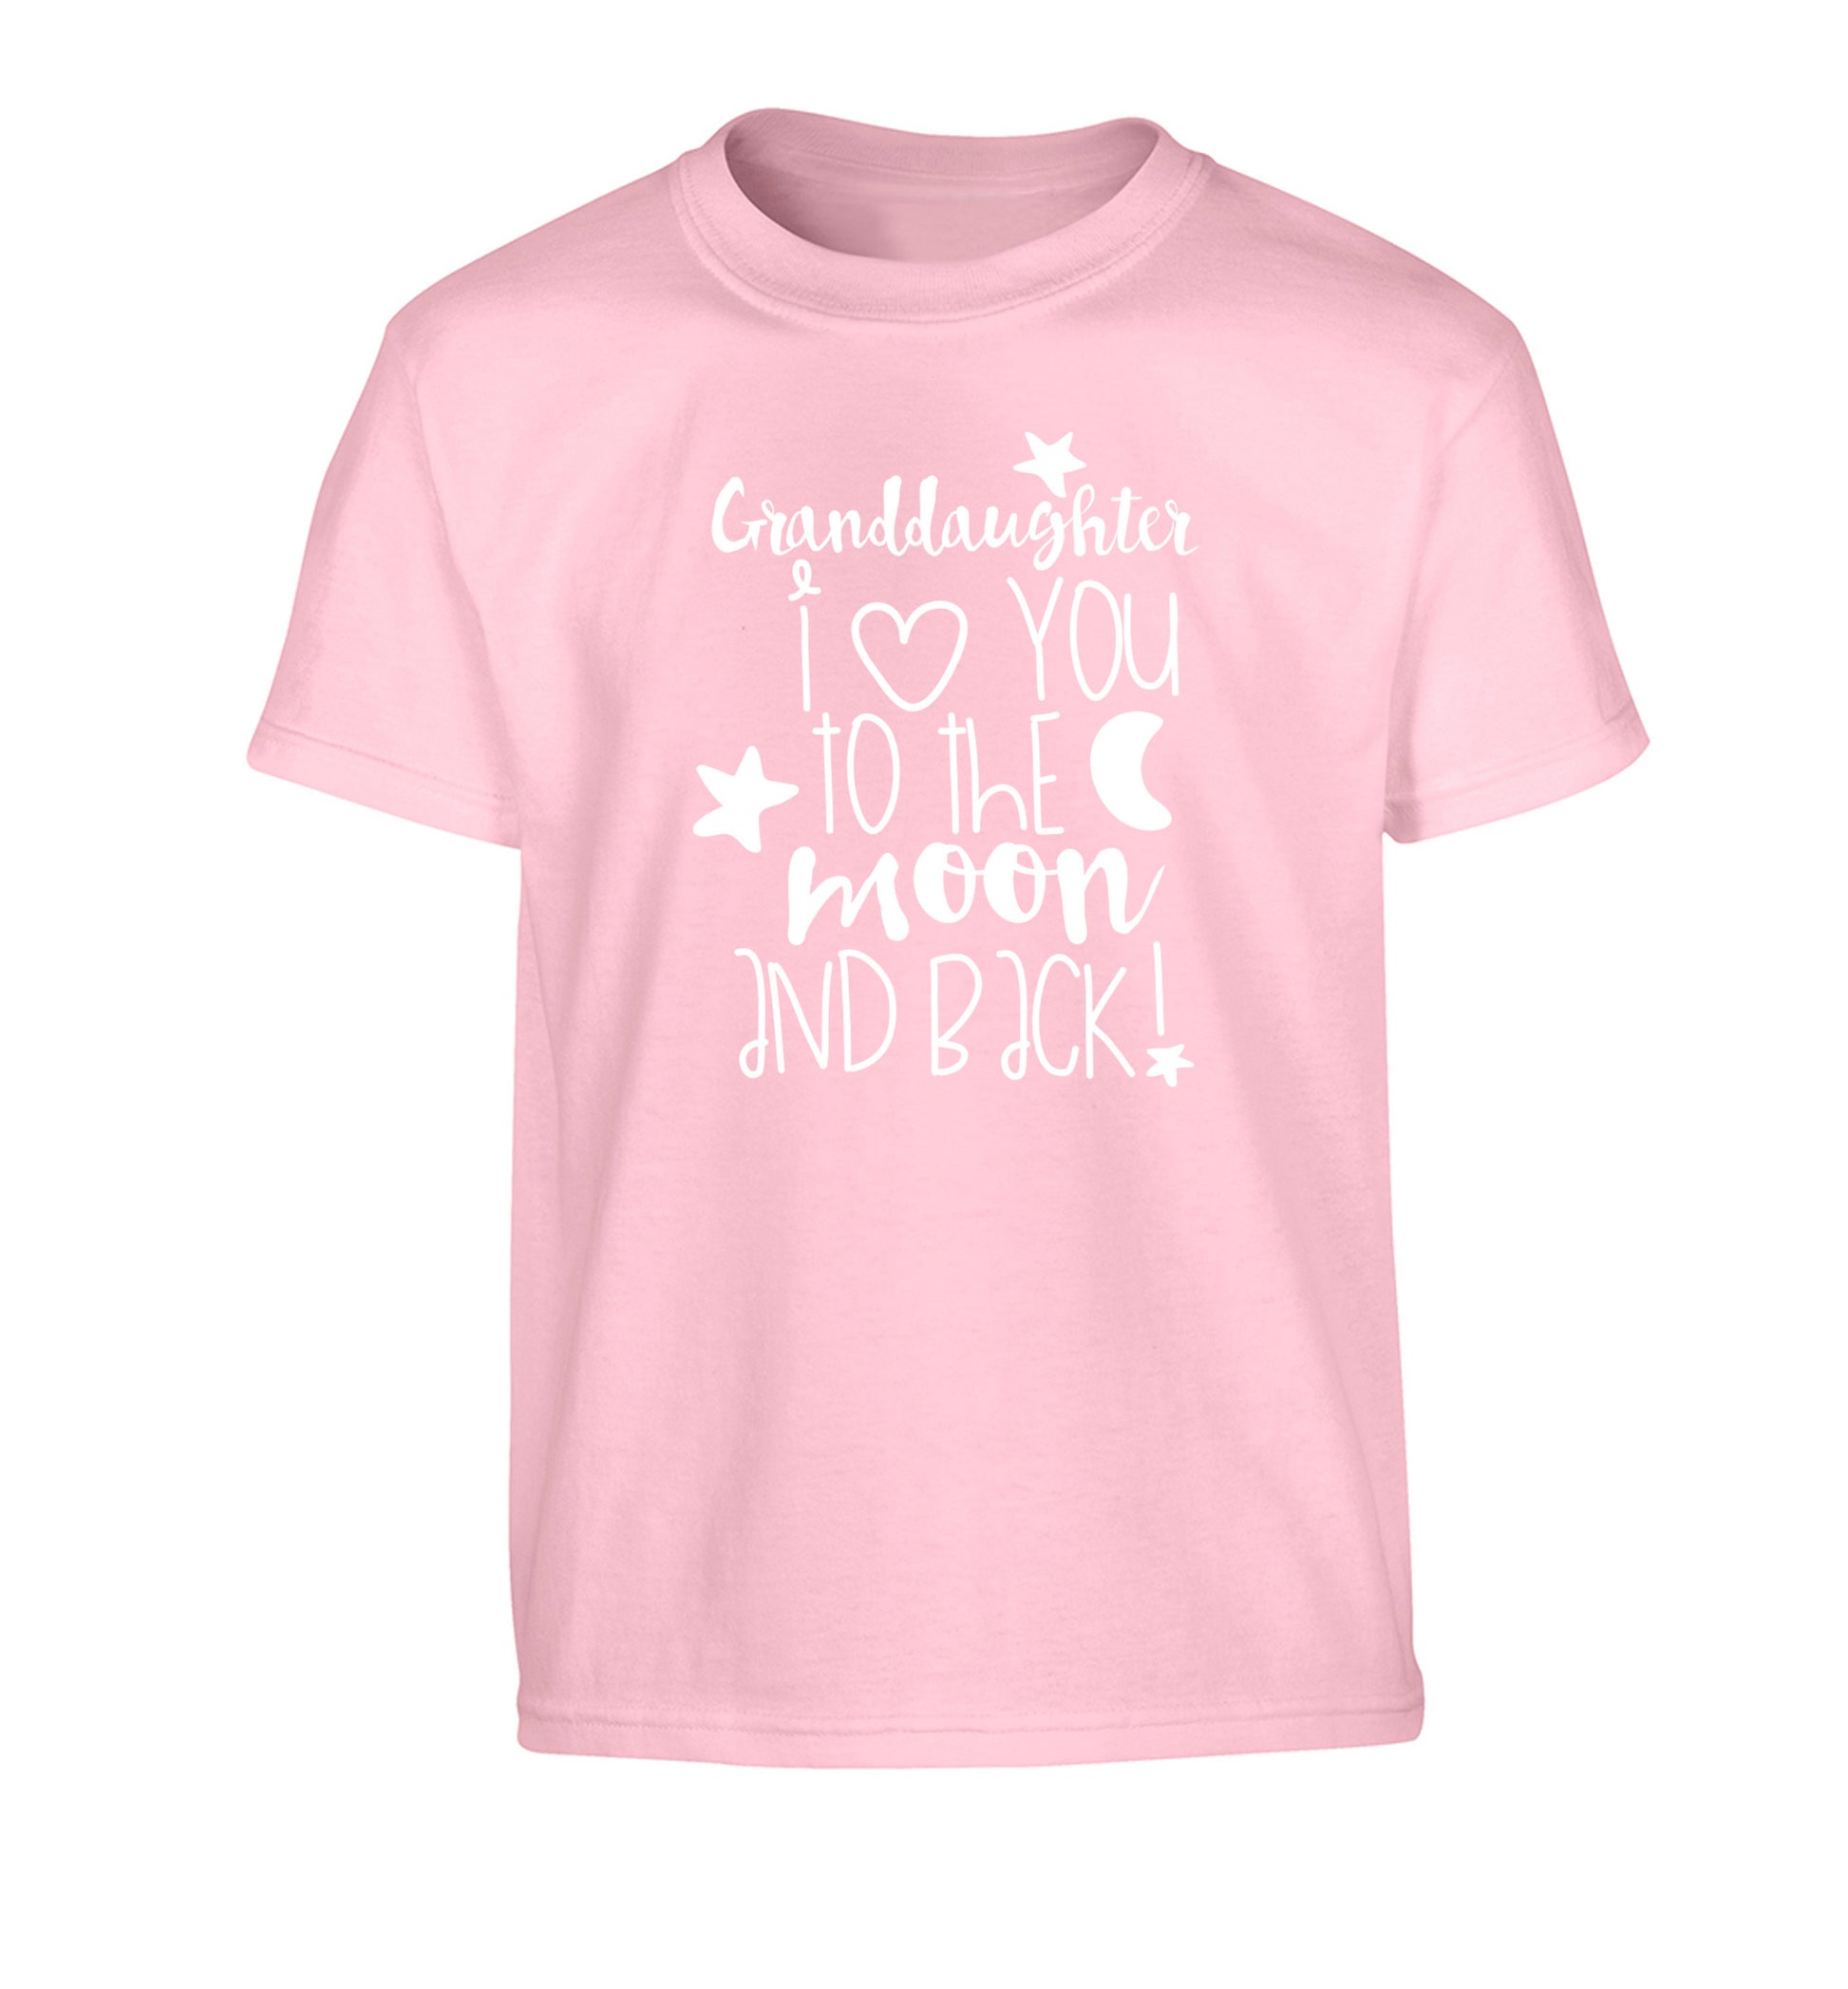 Granddaughter I love you to the moon and back Children's light pink Tshirt 12-14 Years